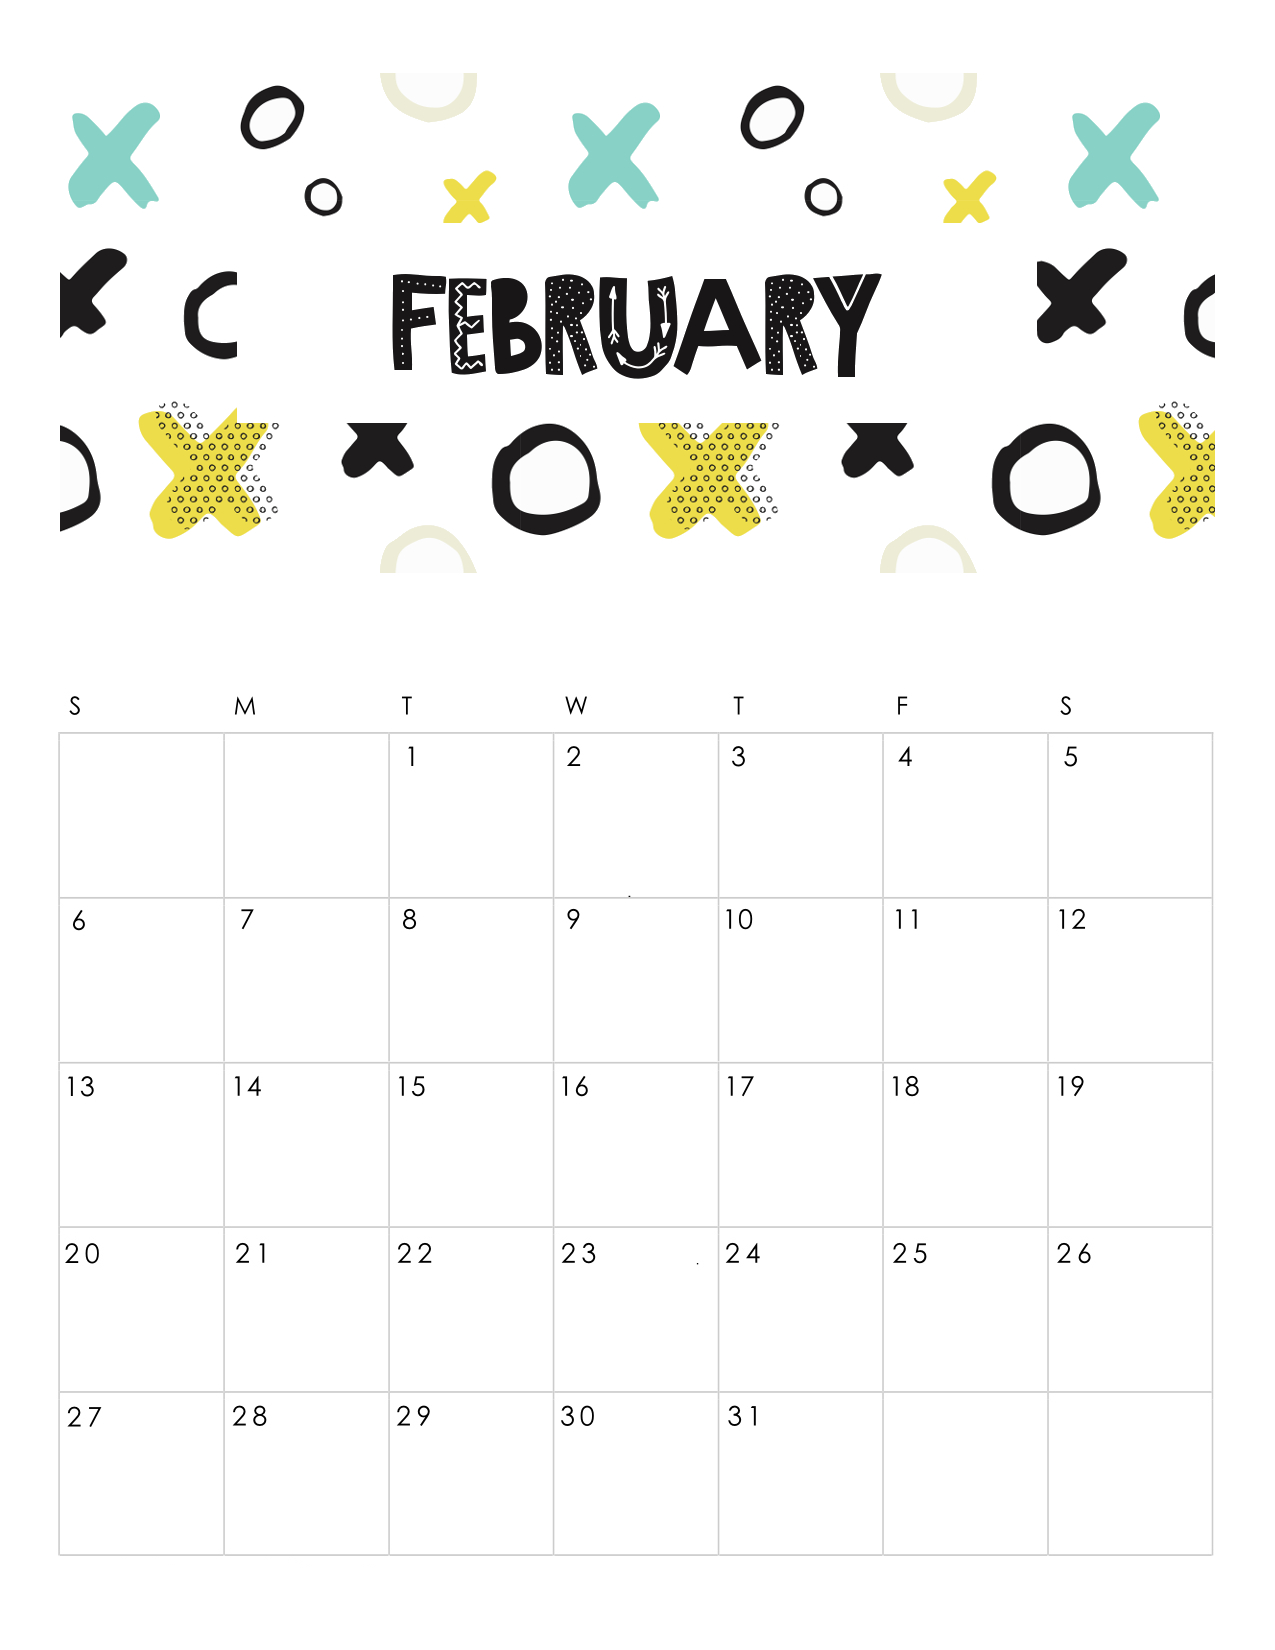 free-printable-abstract-patterned-calendar-february-2019.jpg